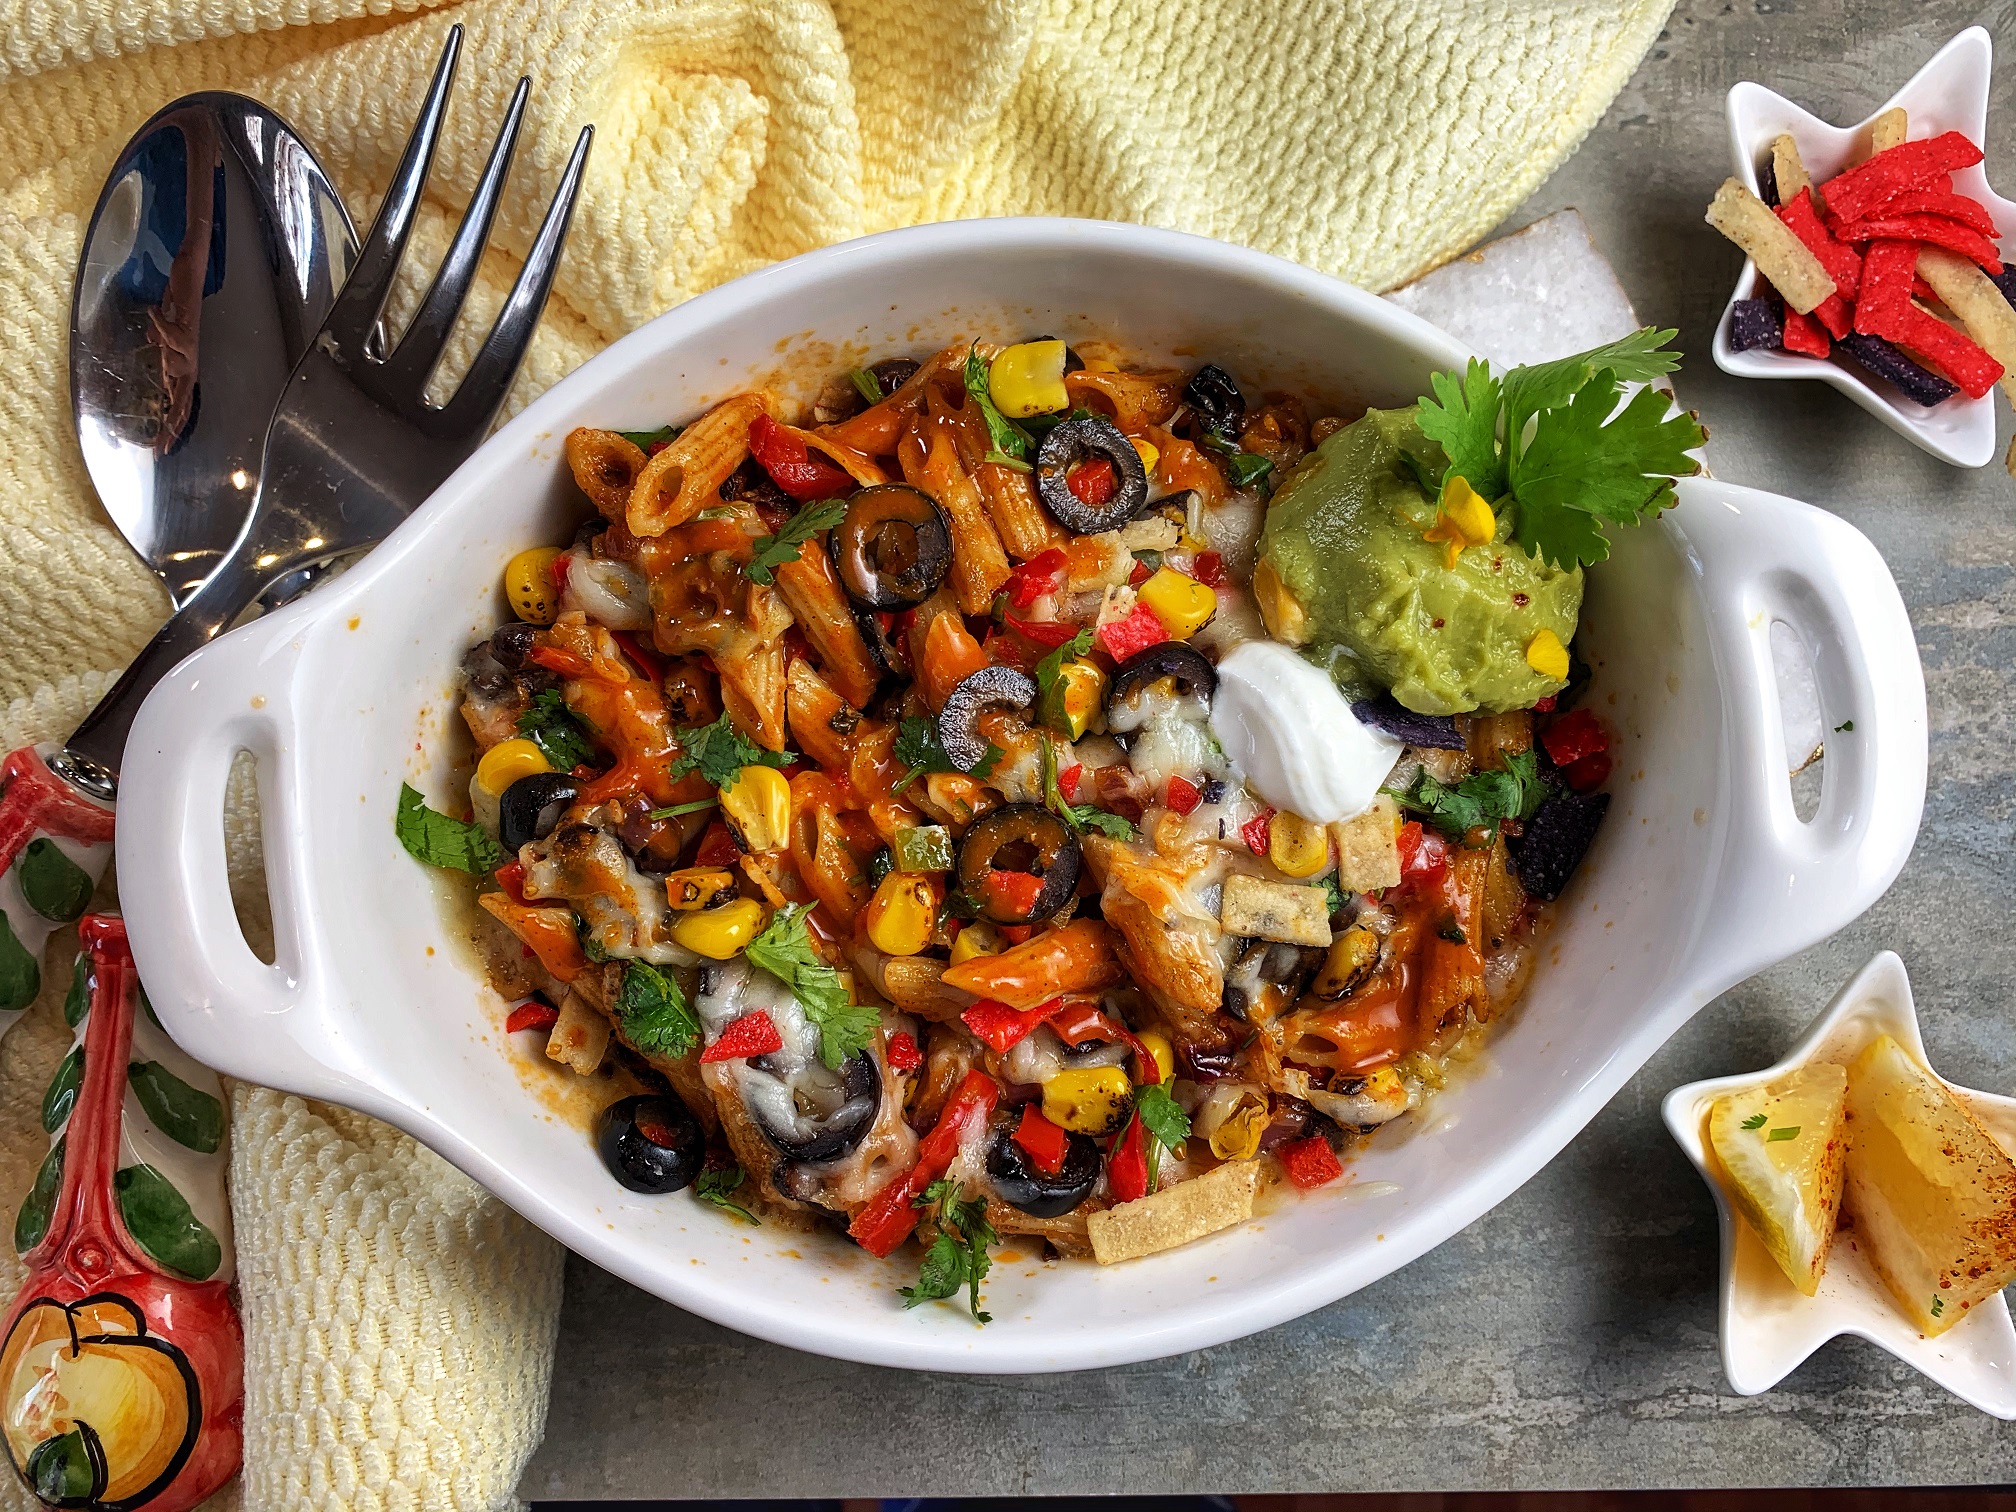 Enchilada Pasta Bake - dotted with colorful veggies, velvety pockets of cheese, and an array of vibrant spices, this baked vegetarian Mexican Pasta is the fusion dish of your dreams! There’s no better way to spice up a pasta dish than adding in some homemade enchilada sauce for a fun twist!